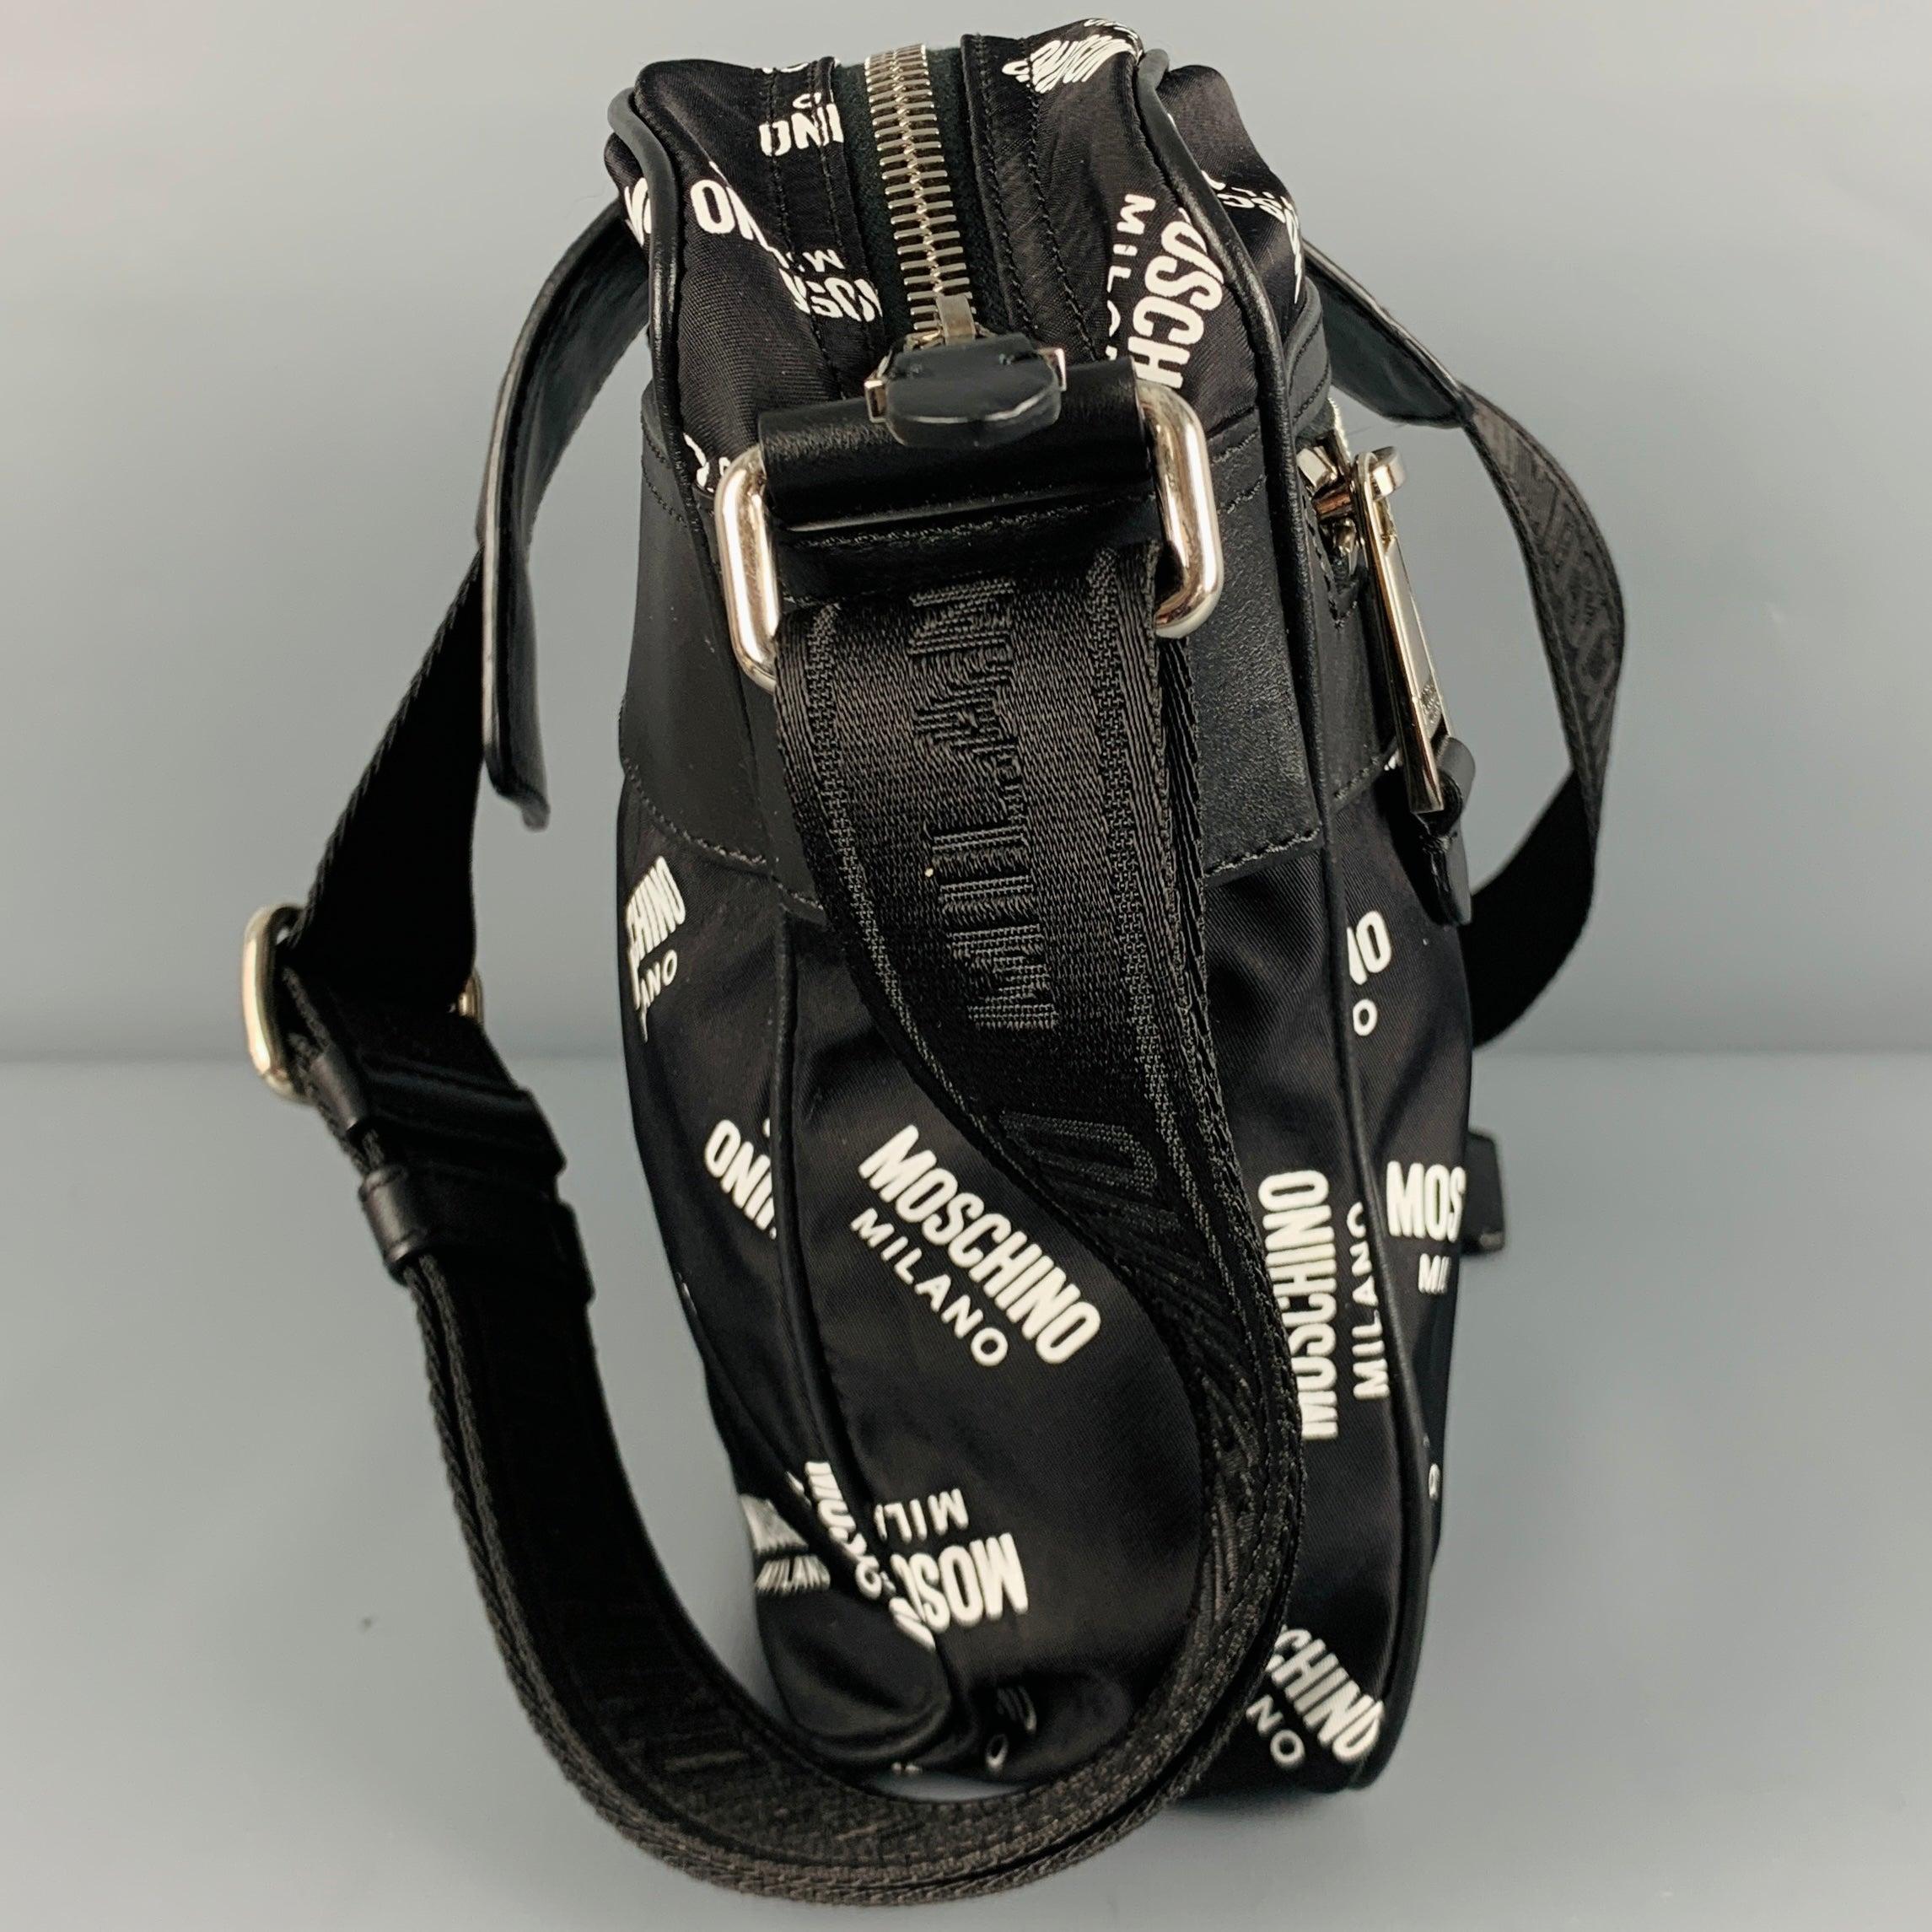 MOSCHINO bag
in a black nyln fabric featuring white logo pattern, crossbody style with wide adjustable shoulder strap, and zip closure. Made in Italy.Excellent Pre-Owned Condition. 

Measurements: 
  Length: 7 inches Width: 3.5 inches Height: 8